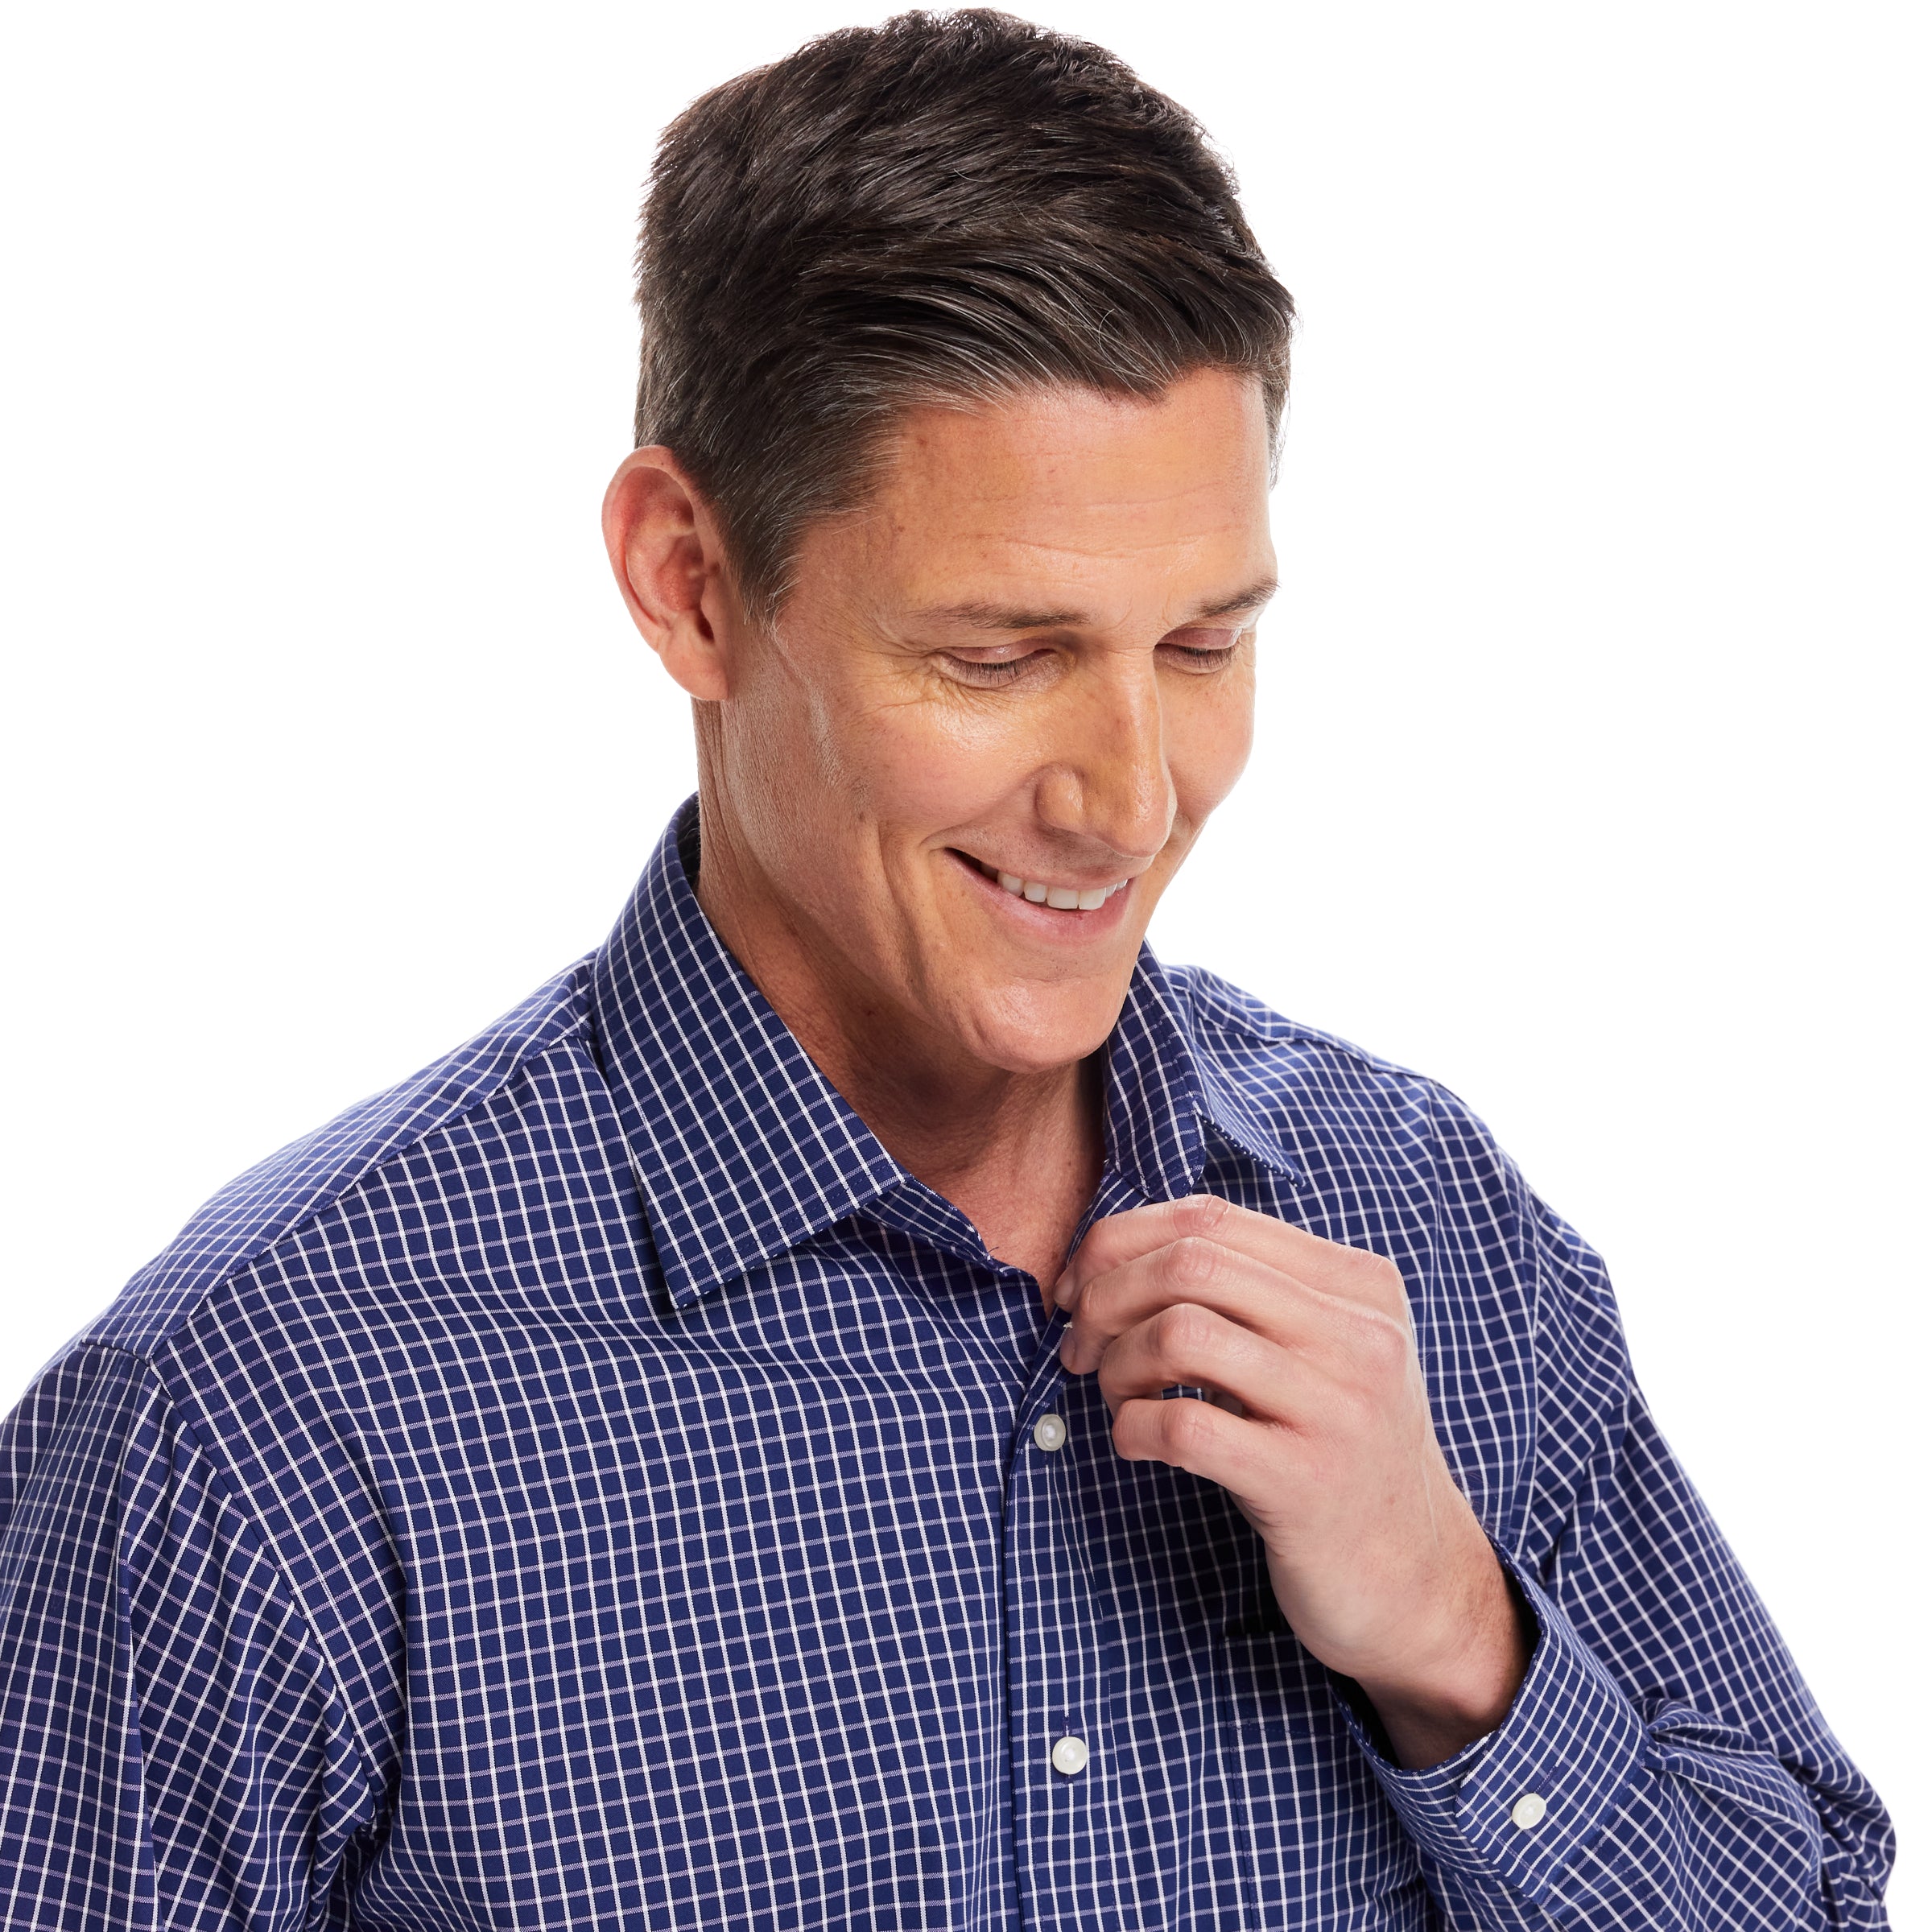 Classic Navy Cotton Long Sleeve  ‘Ryan’ Dress Shirt with Magnetic Closures